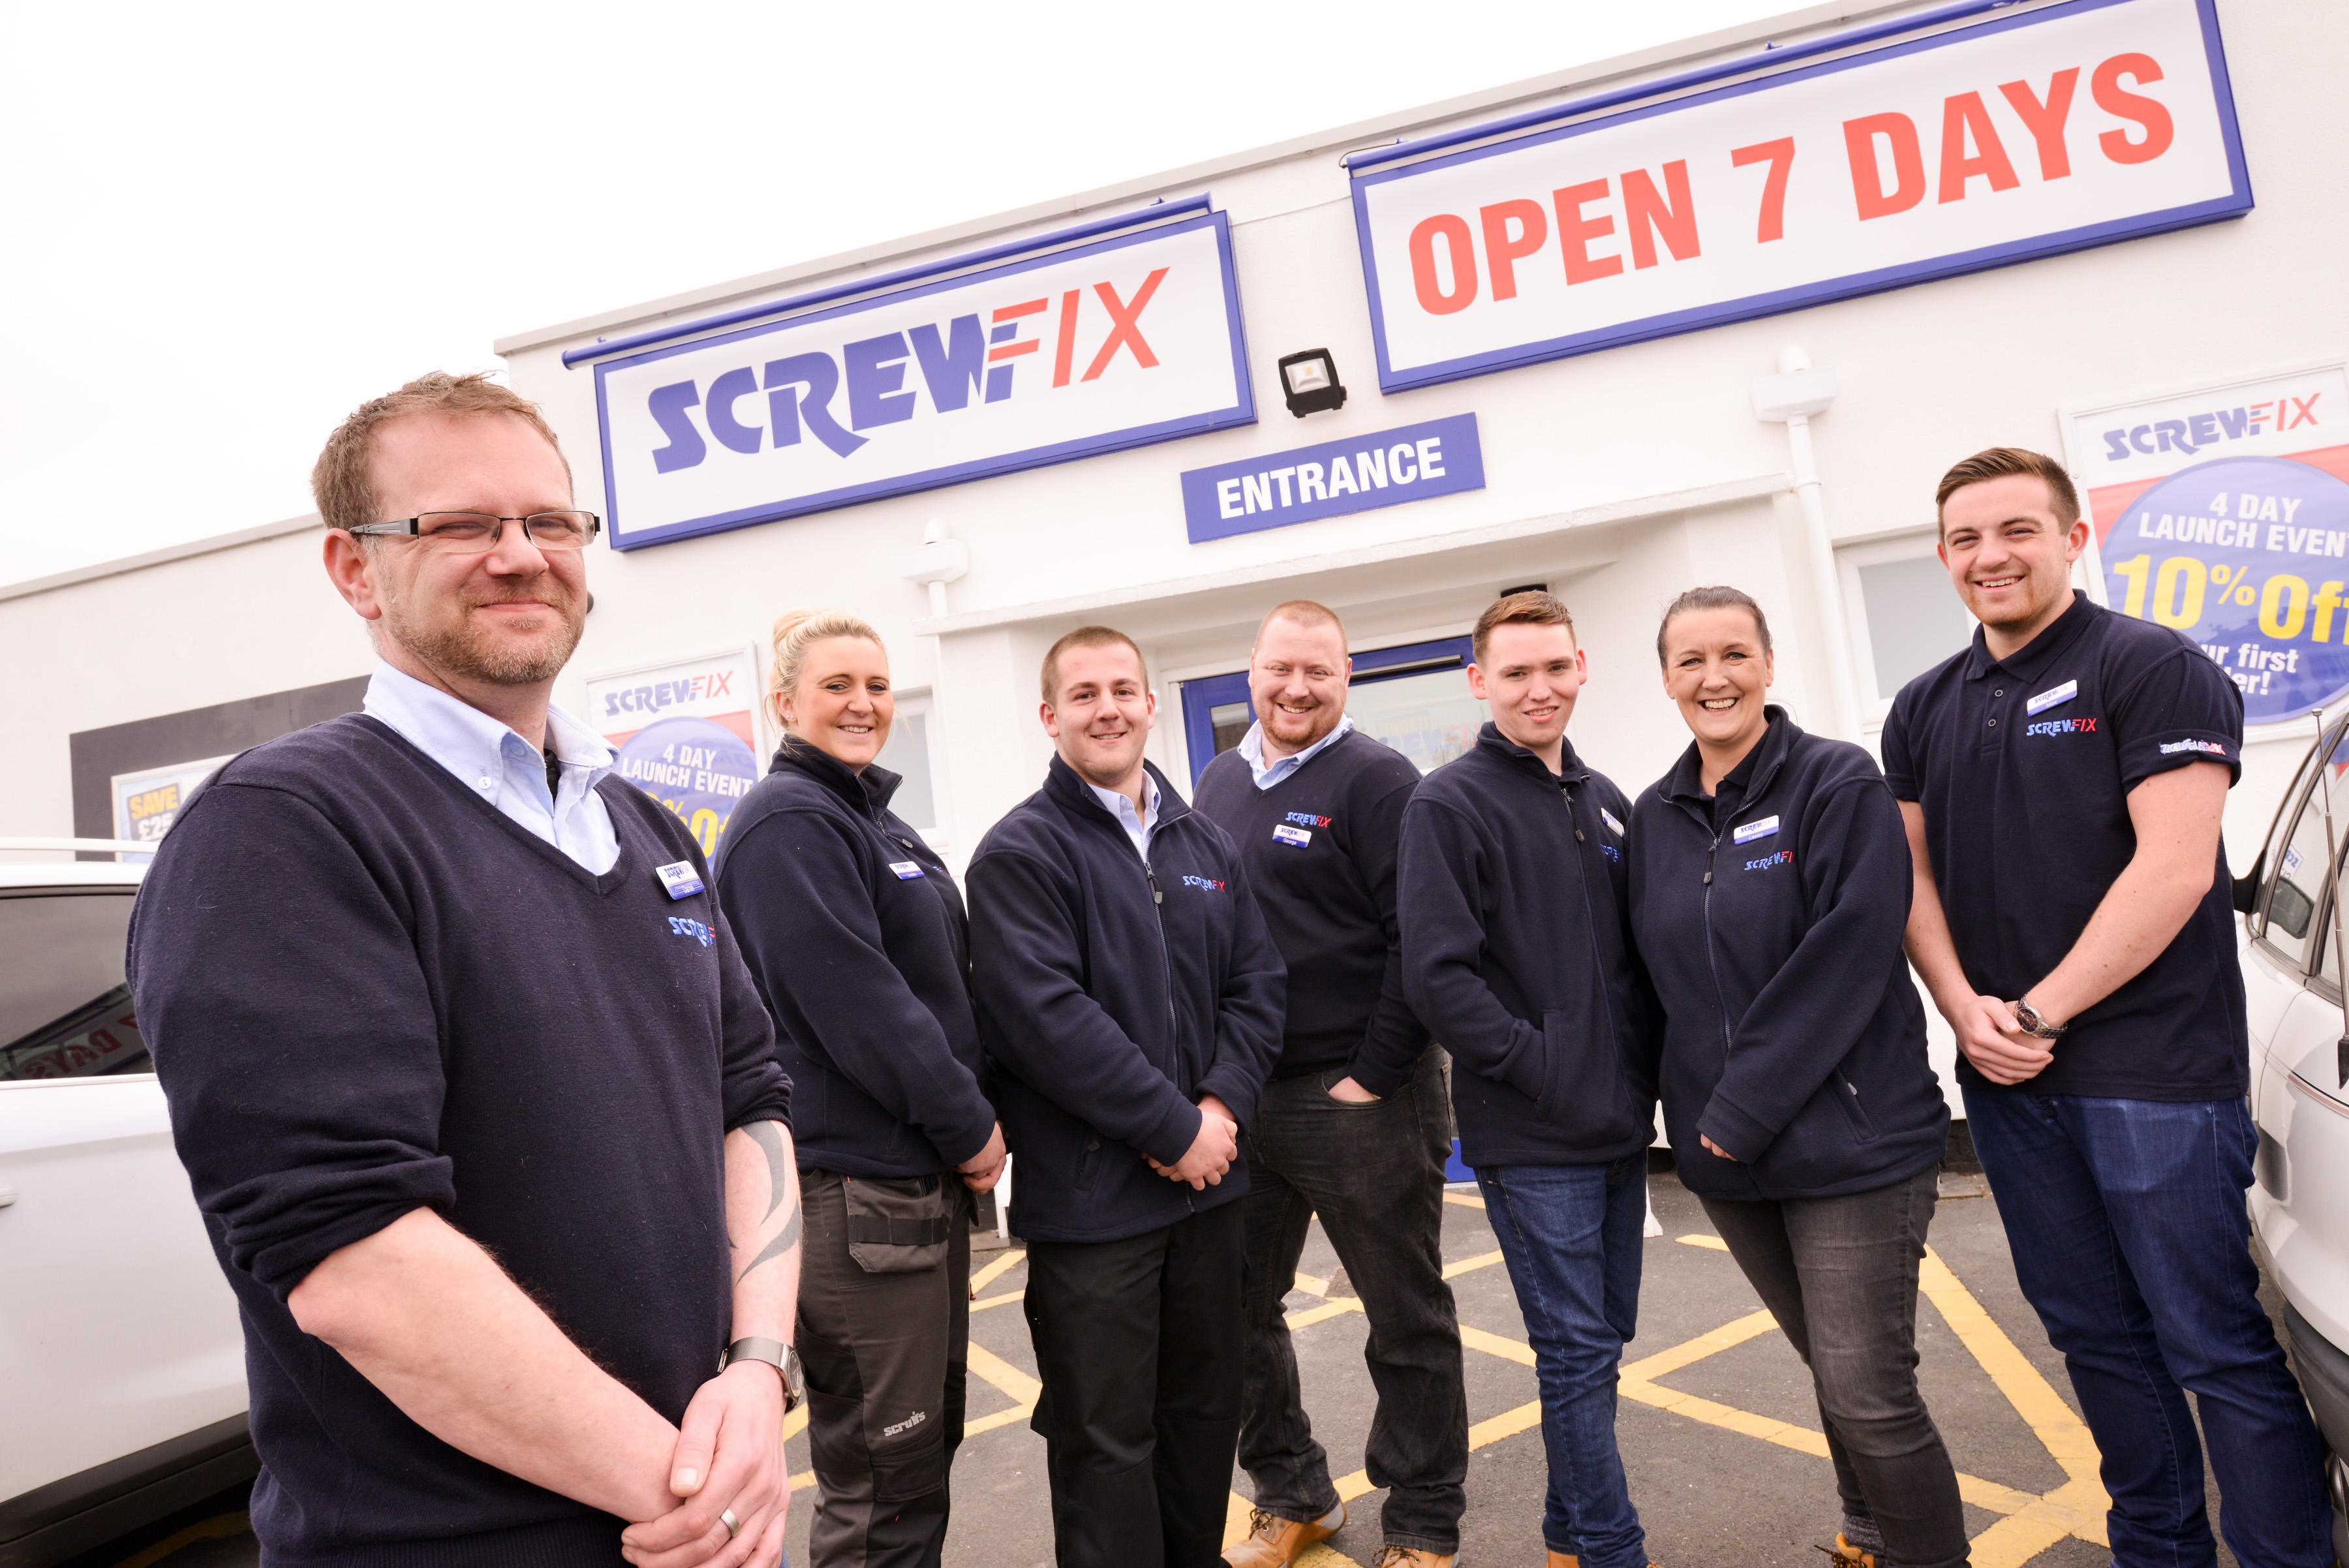 Blackpool’s second Screwfix store is declared a runaway success